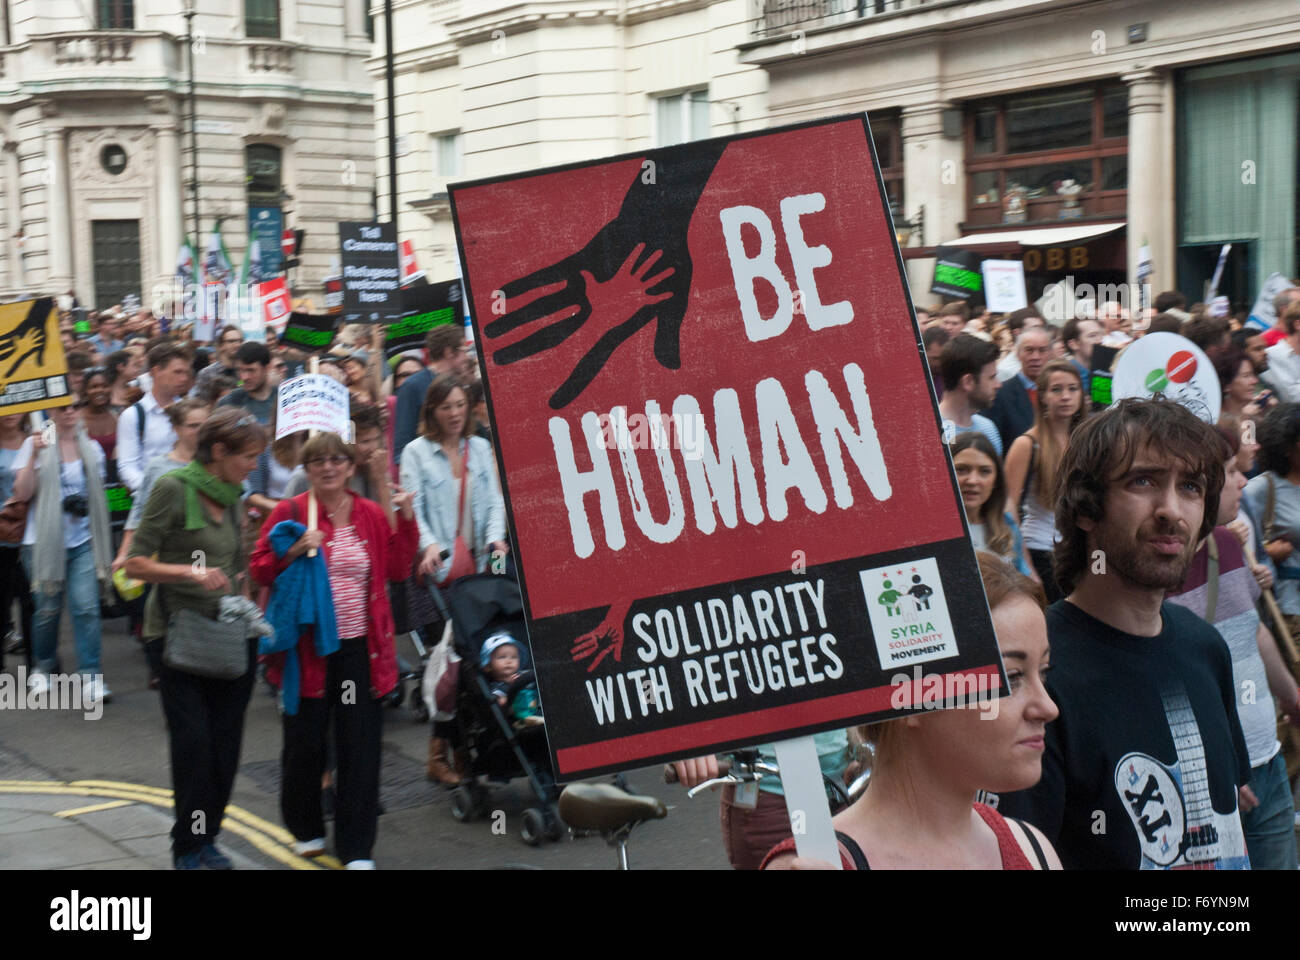 'Refugees welcome here' demonstration. Poster 'Be Human, solidarity with refugees' Stock Photo